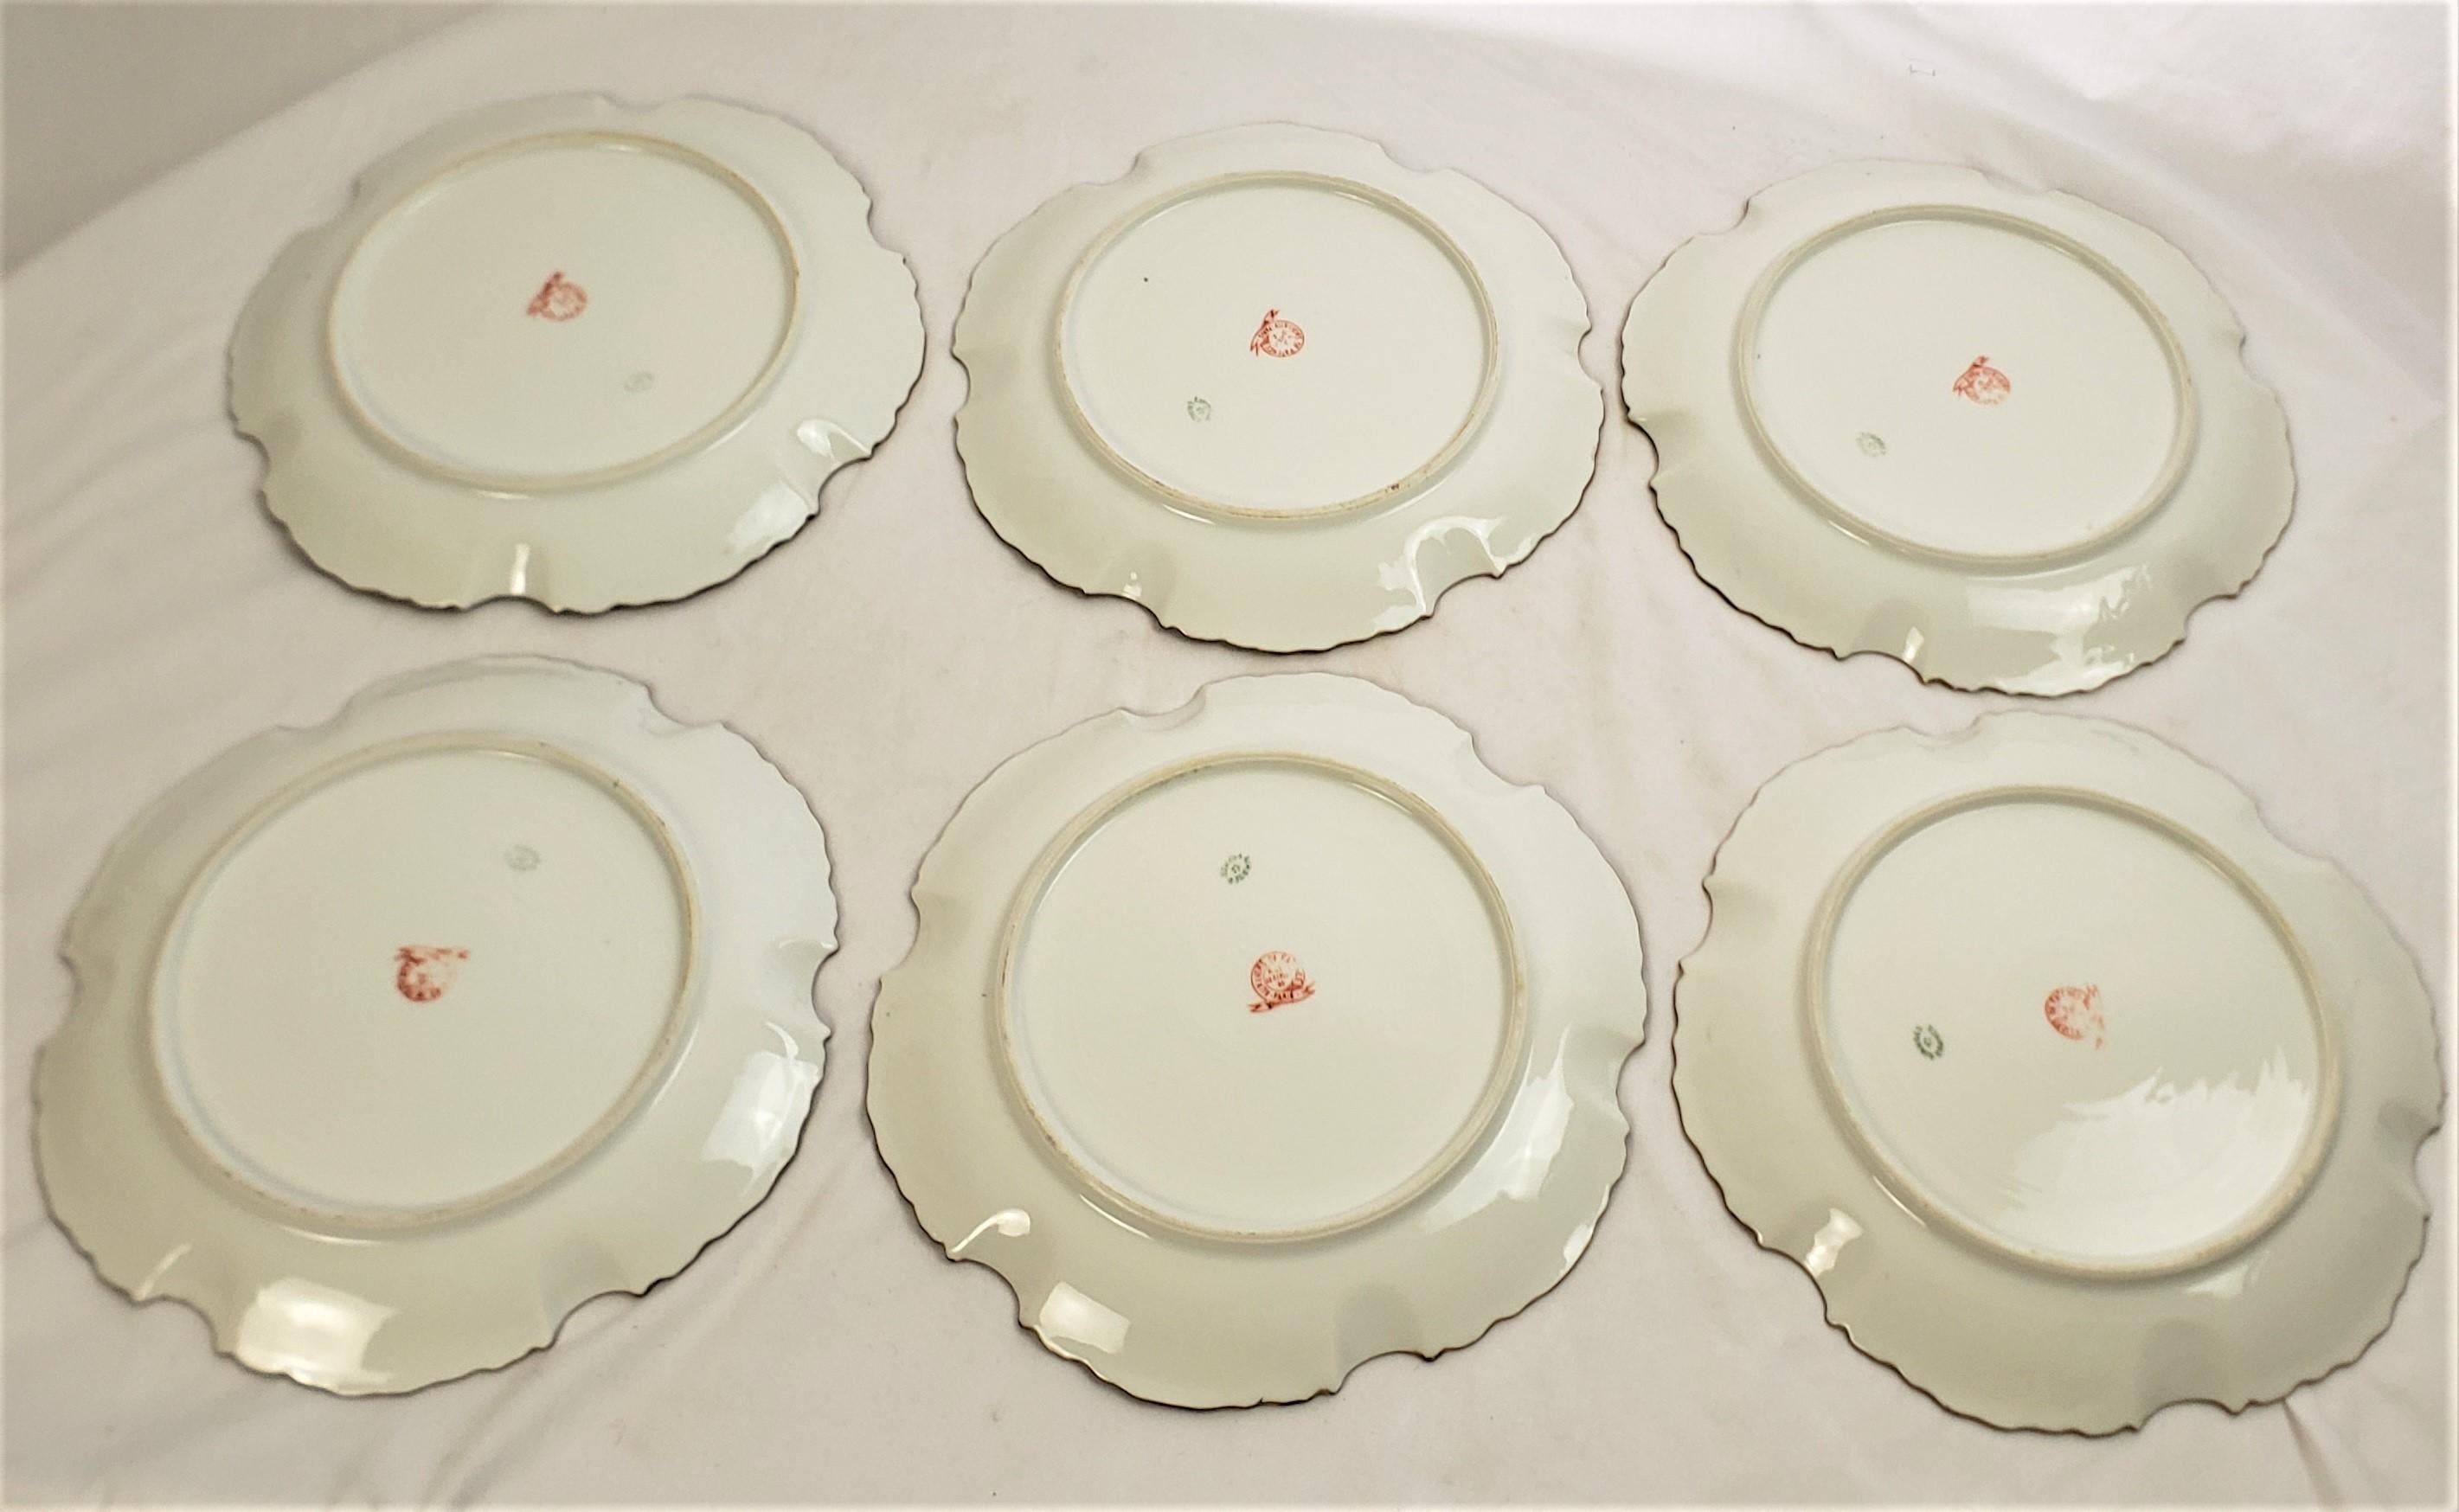 Antique Limoges Hand-Painted Fish Set with Matching Platter & Sauce Boat For Sale 2